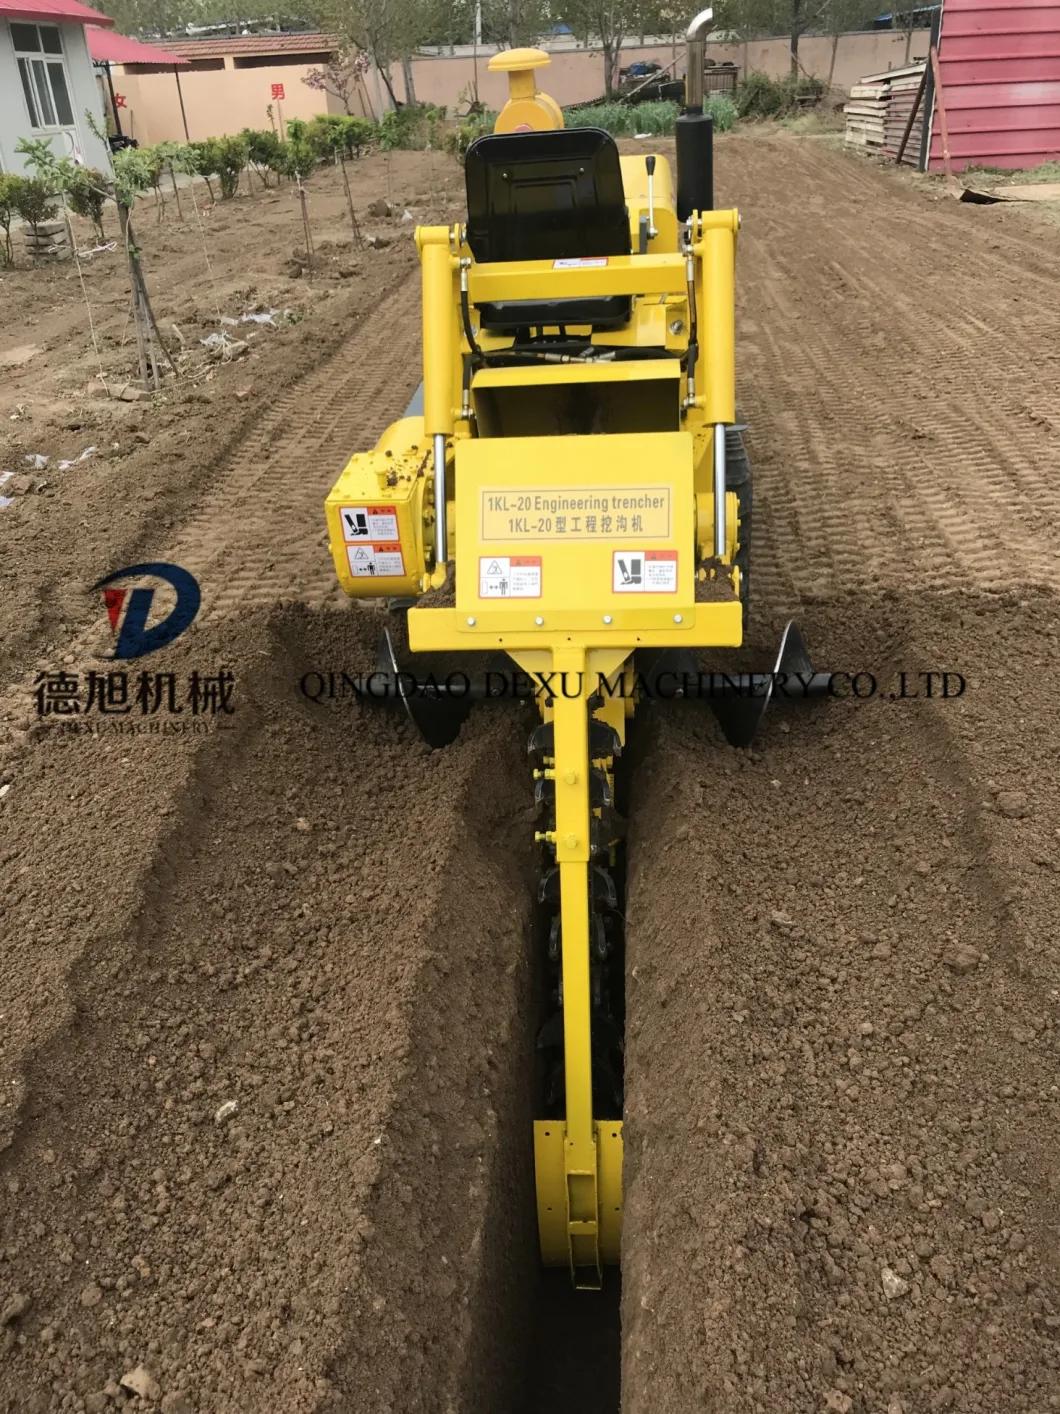 Pipeline Excavation Engineering Equipment/Ditching Machine for City Building Construction Work